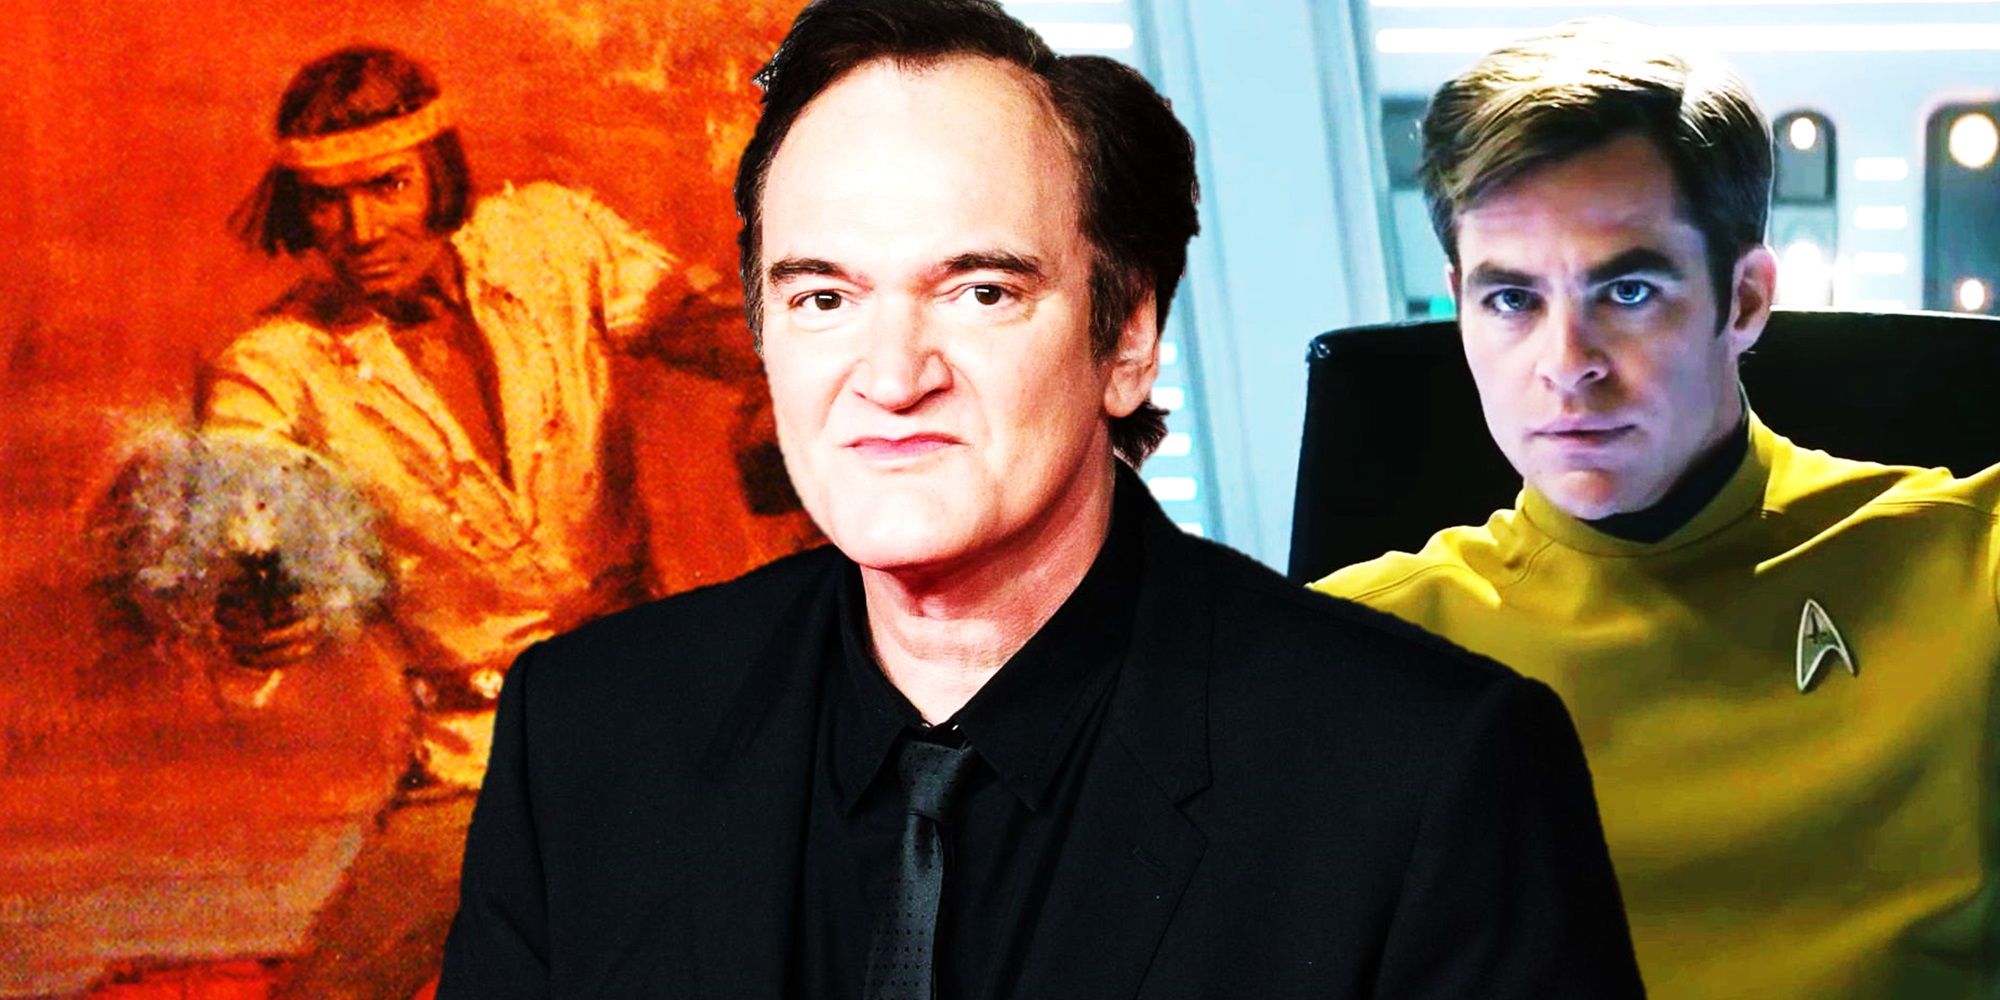 10 Movies That Could Be Quentin Tarantino’s Final Movie After The Movie Critic’s Cancellation